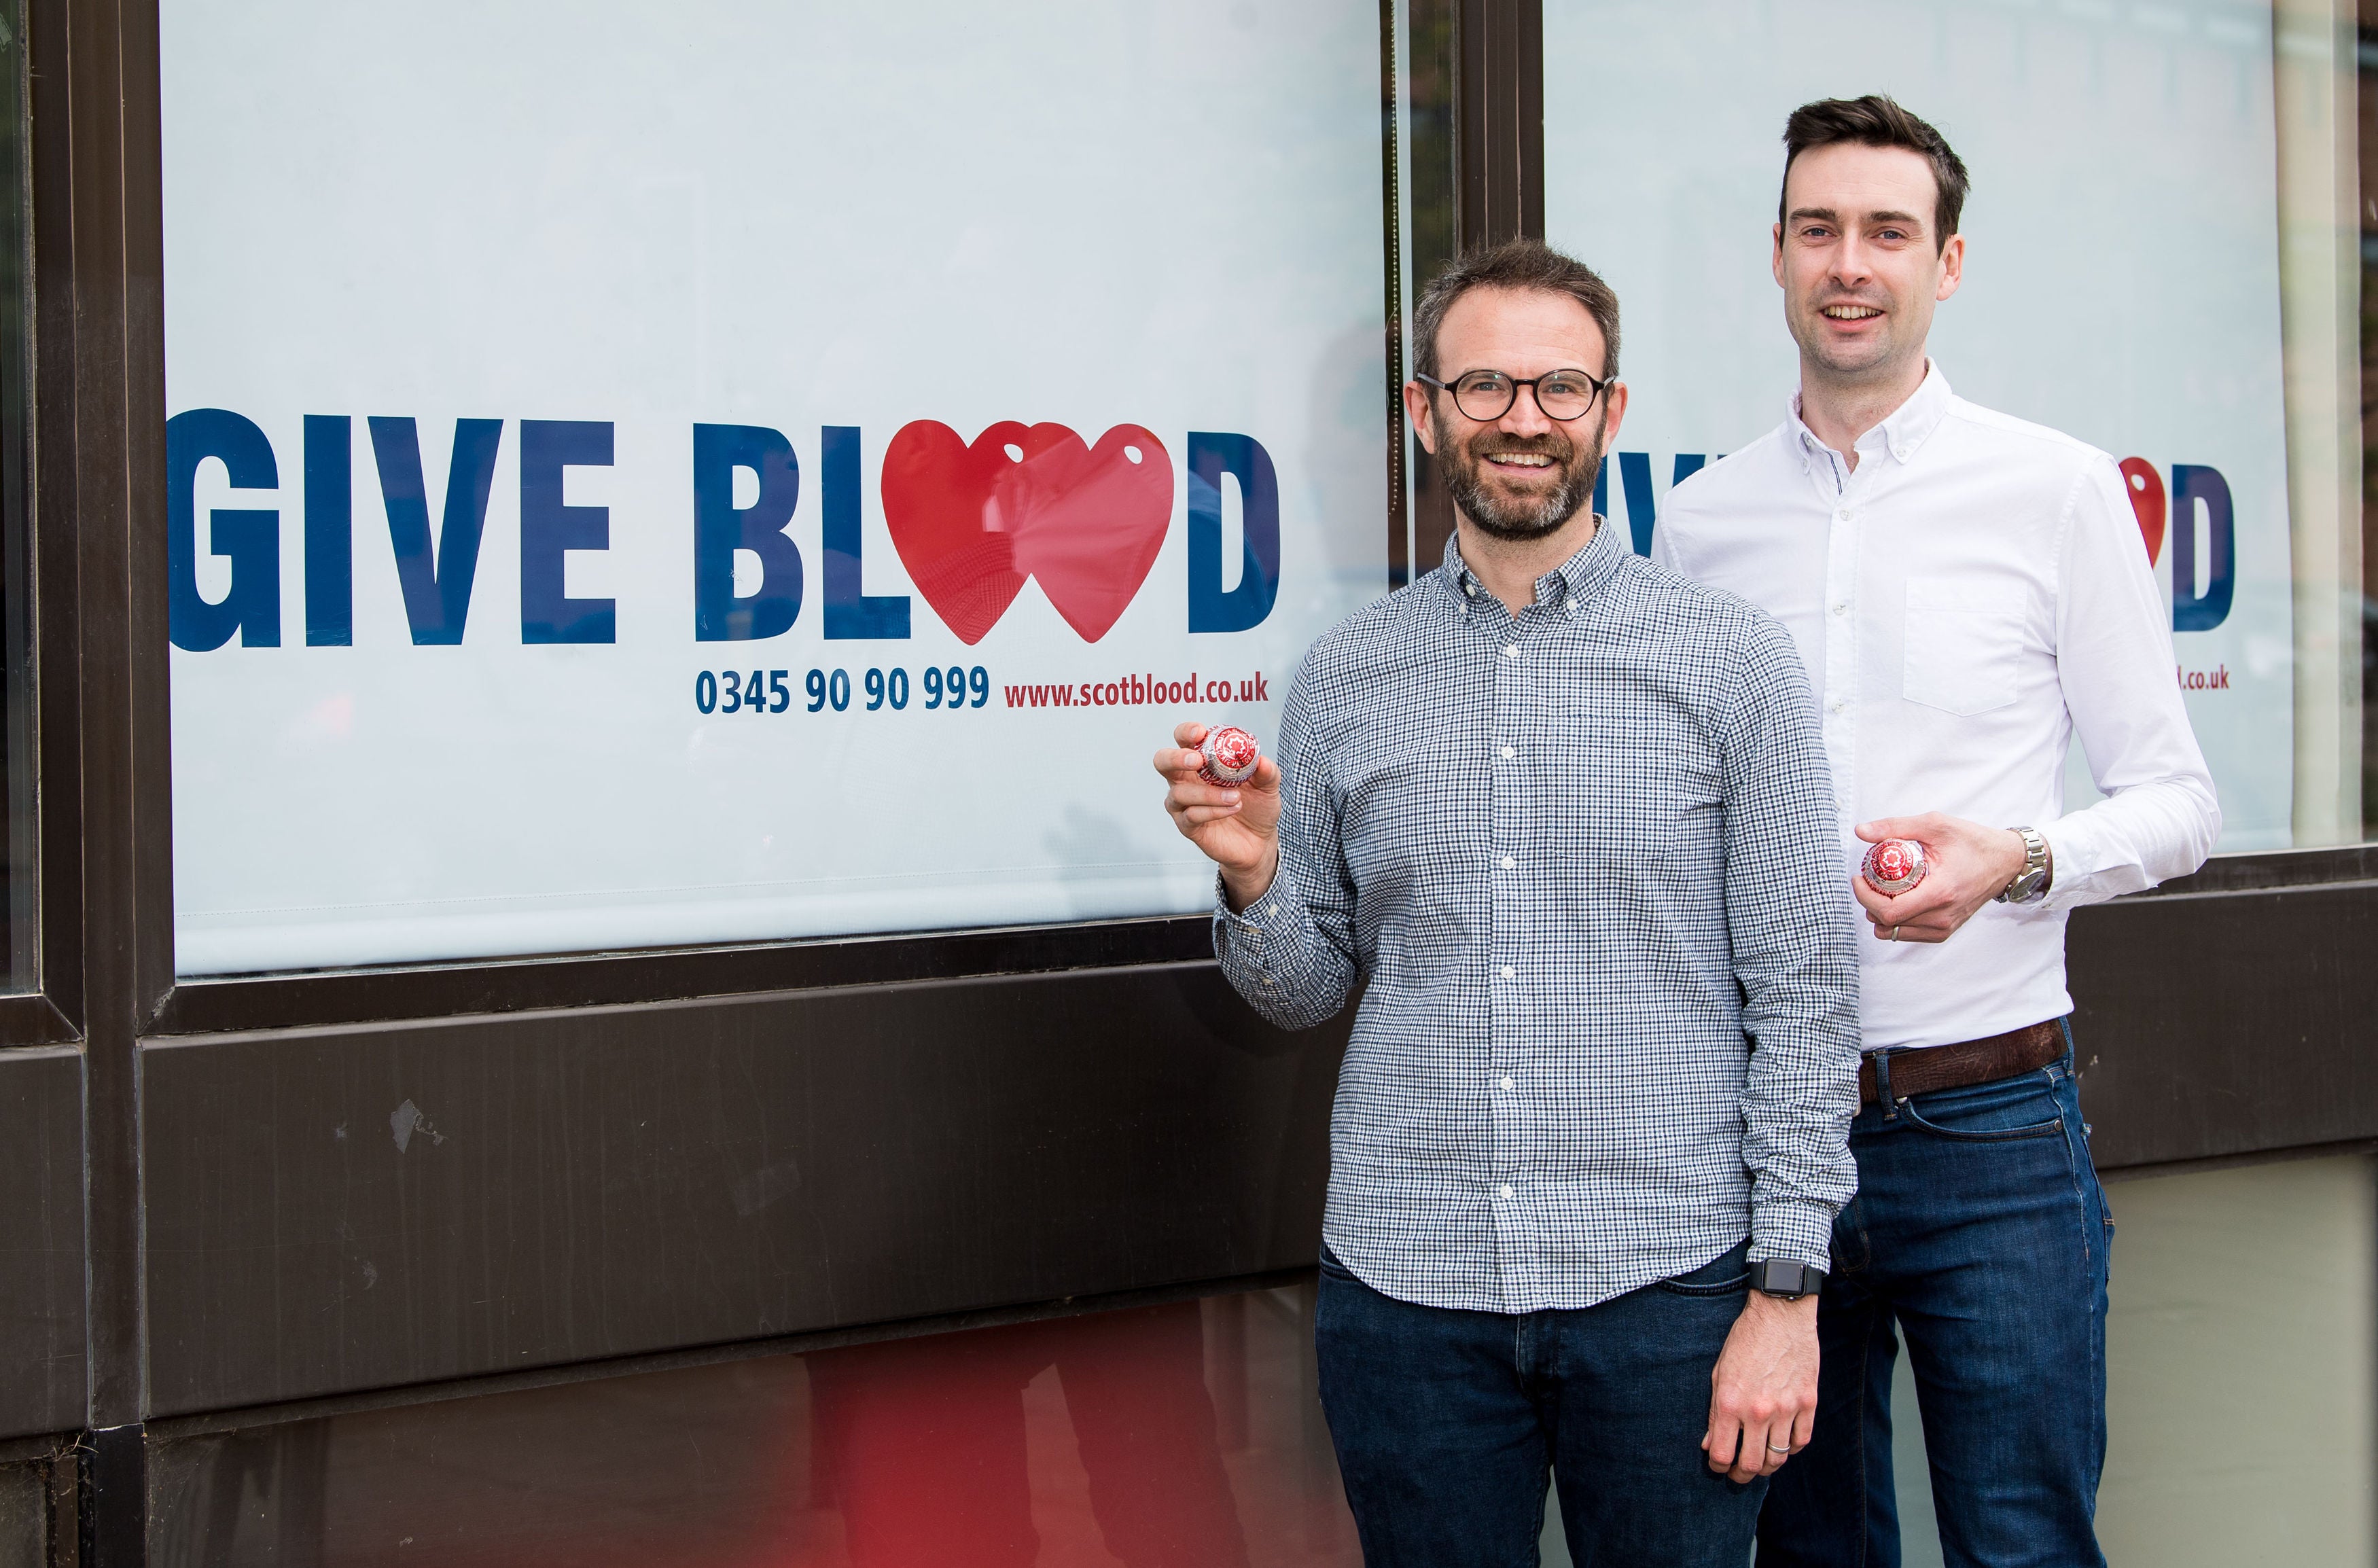 Married couple Steven Smillie and Tyler McNeil mark the changes to blood donation rules at Edinburgh Donor Centre in Scotland